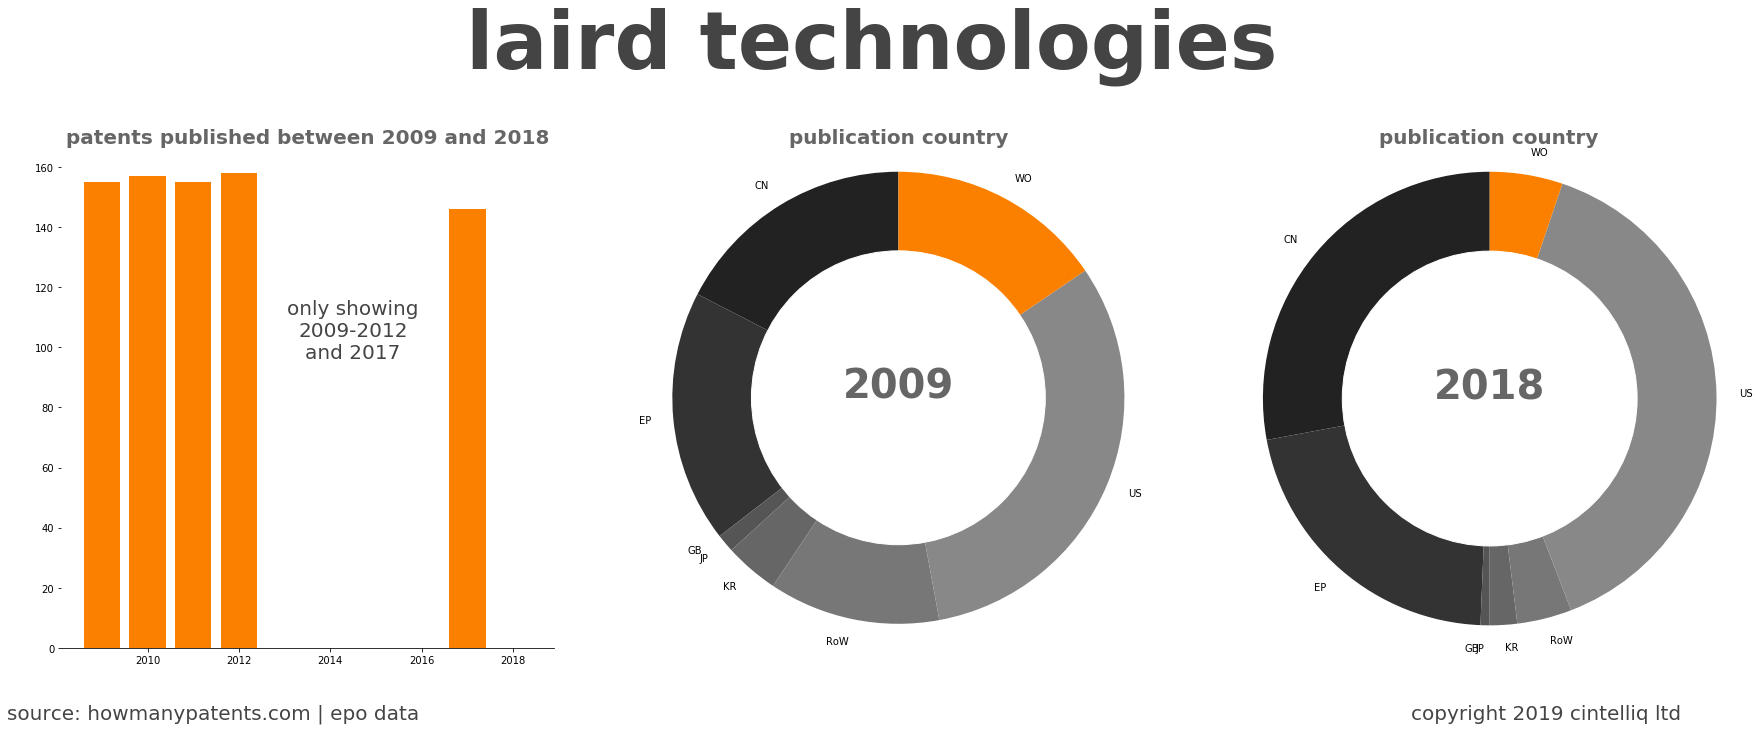 summary of patents for Laird Technologies